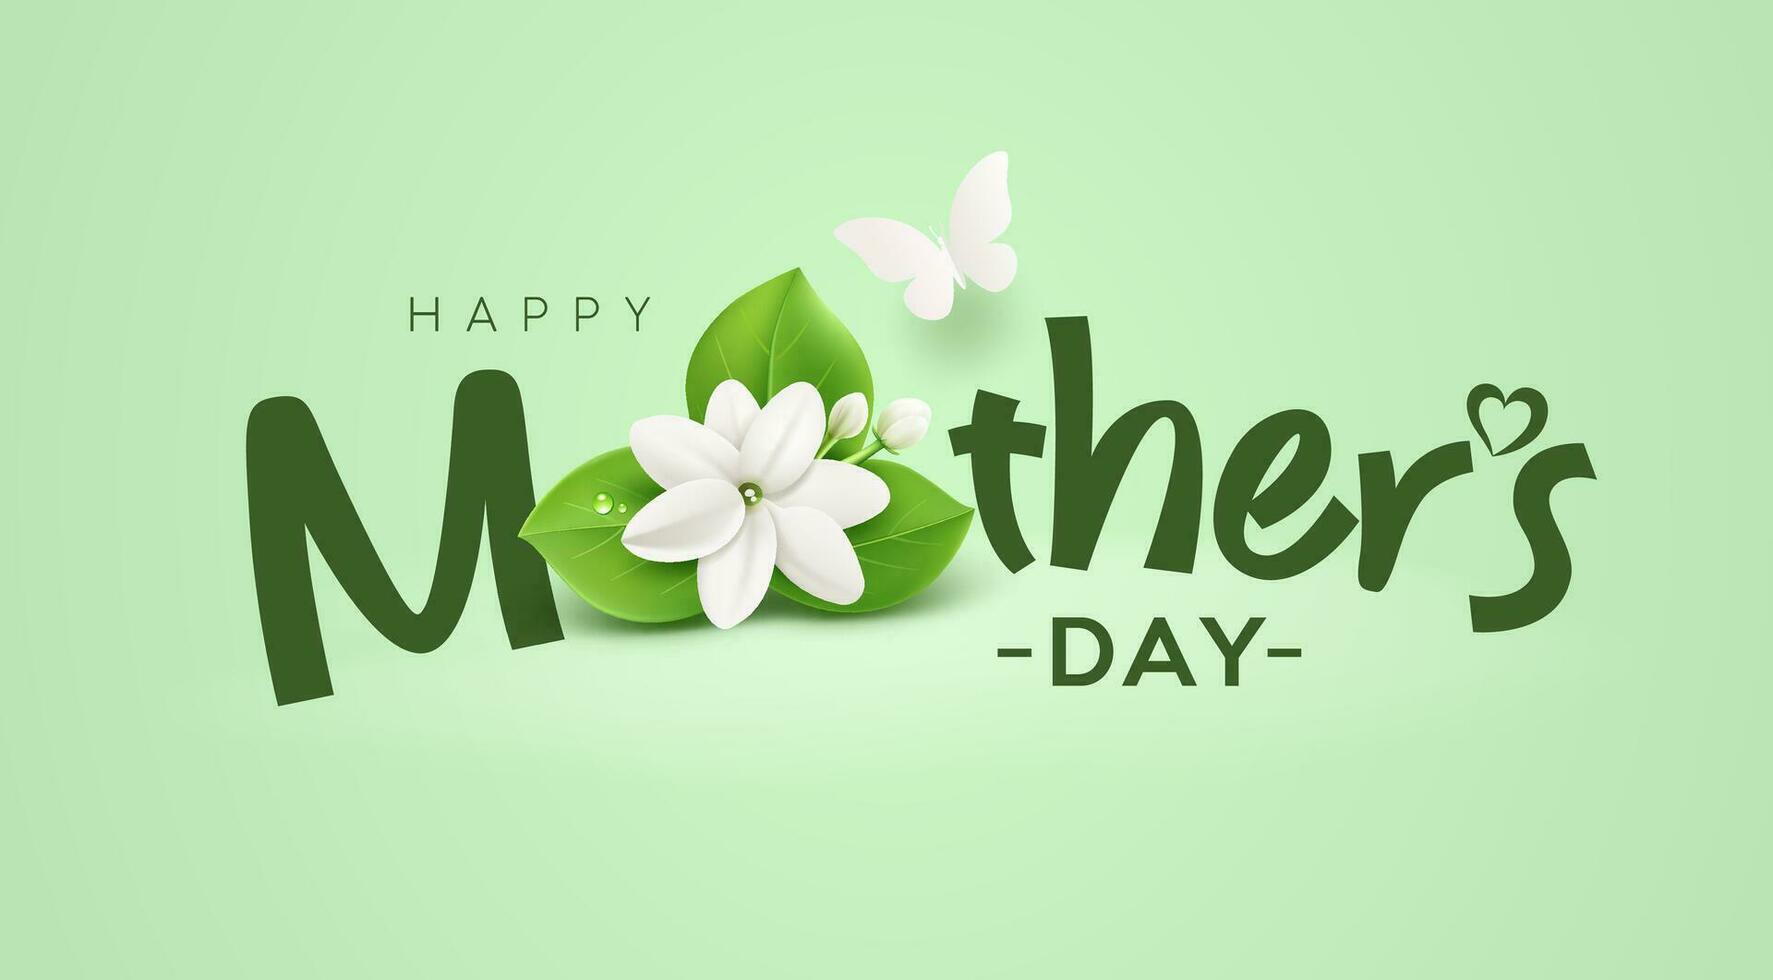 Mother's day message, with jasmine flower design white and green leaf on green background, EPS10 Vector illustration.